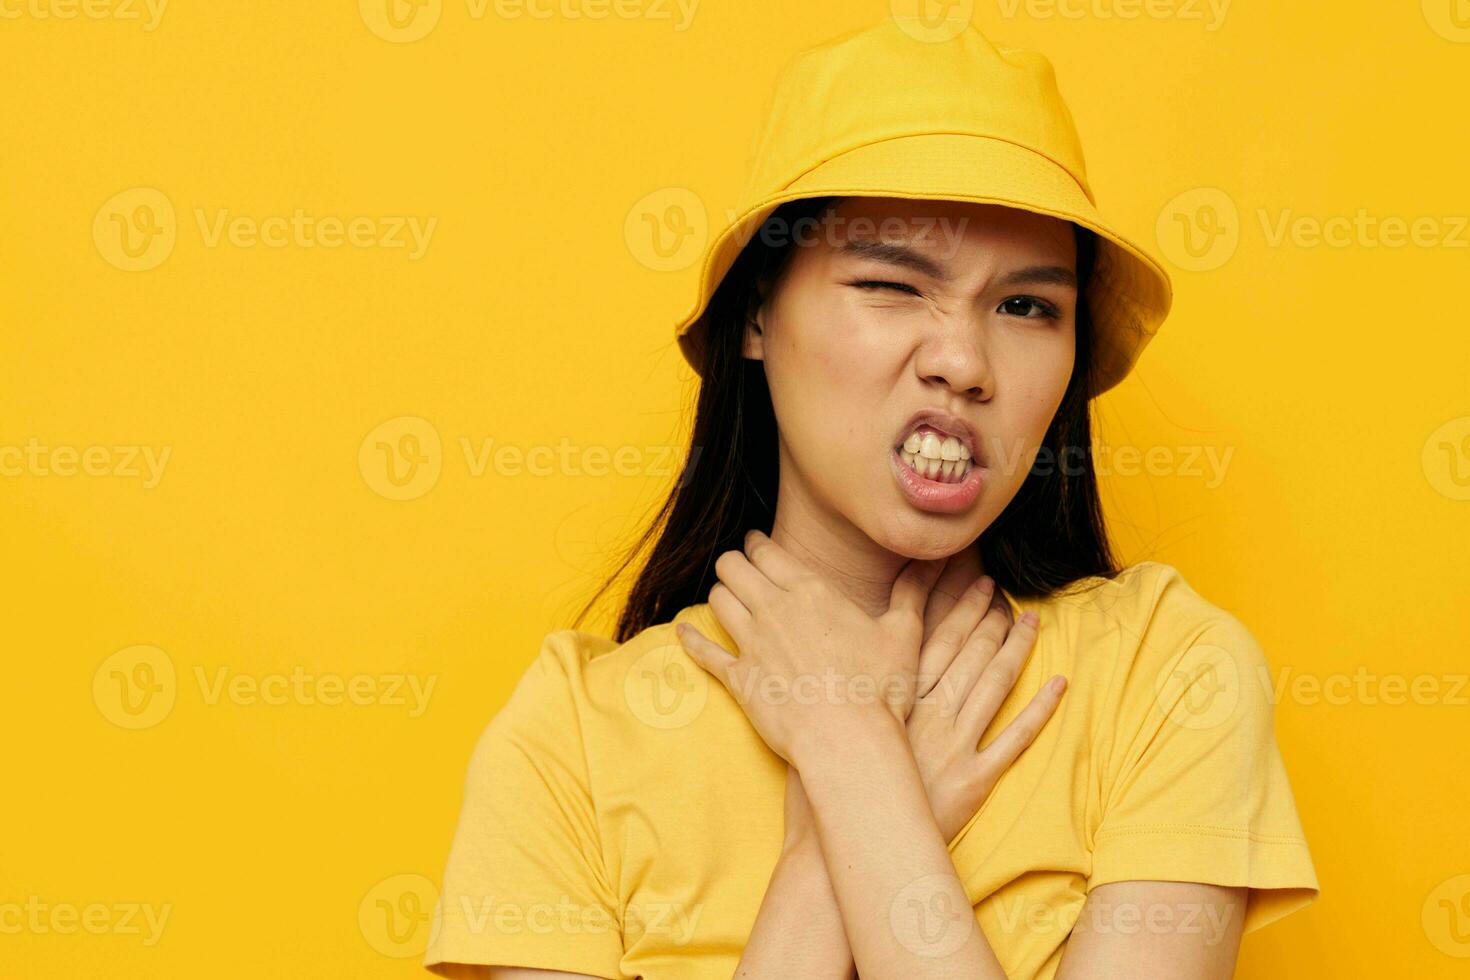 Charming young Asian woman wearing a yellow hat posing emotions yellow background unaltered photo